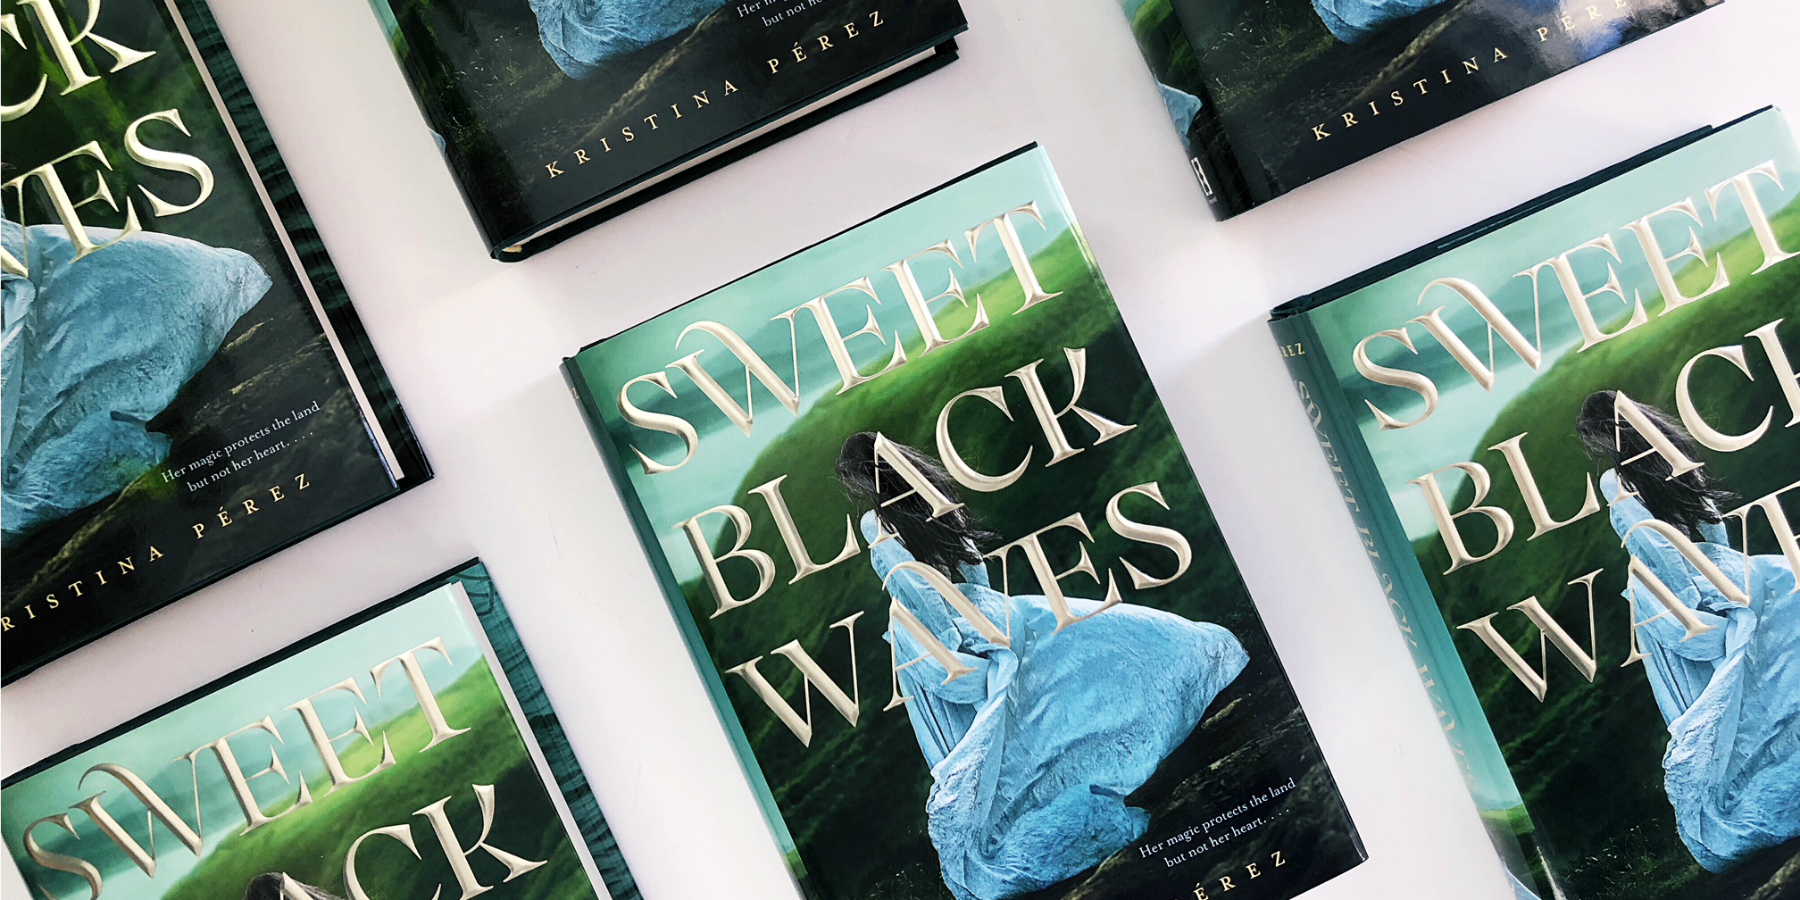 An Interview with Kristina Pérez, Author of Sweet Black Waves